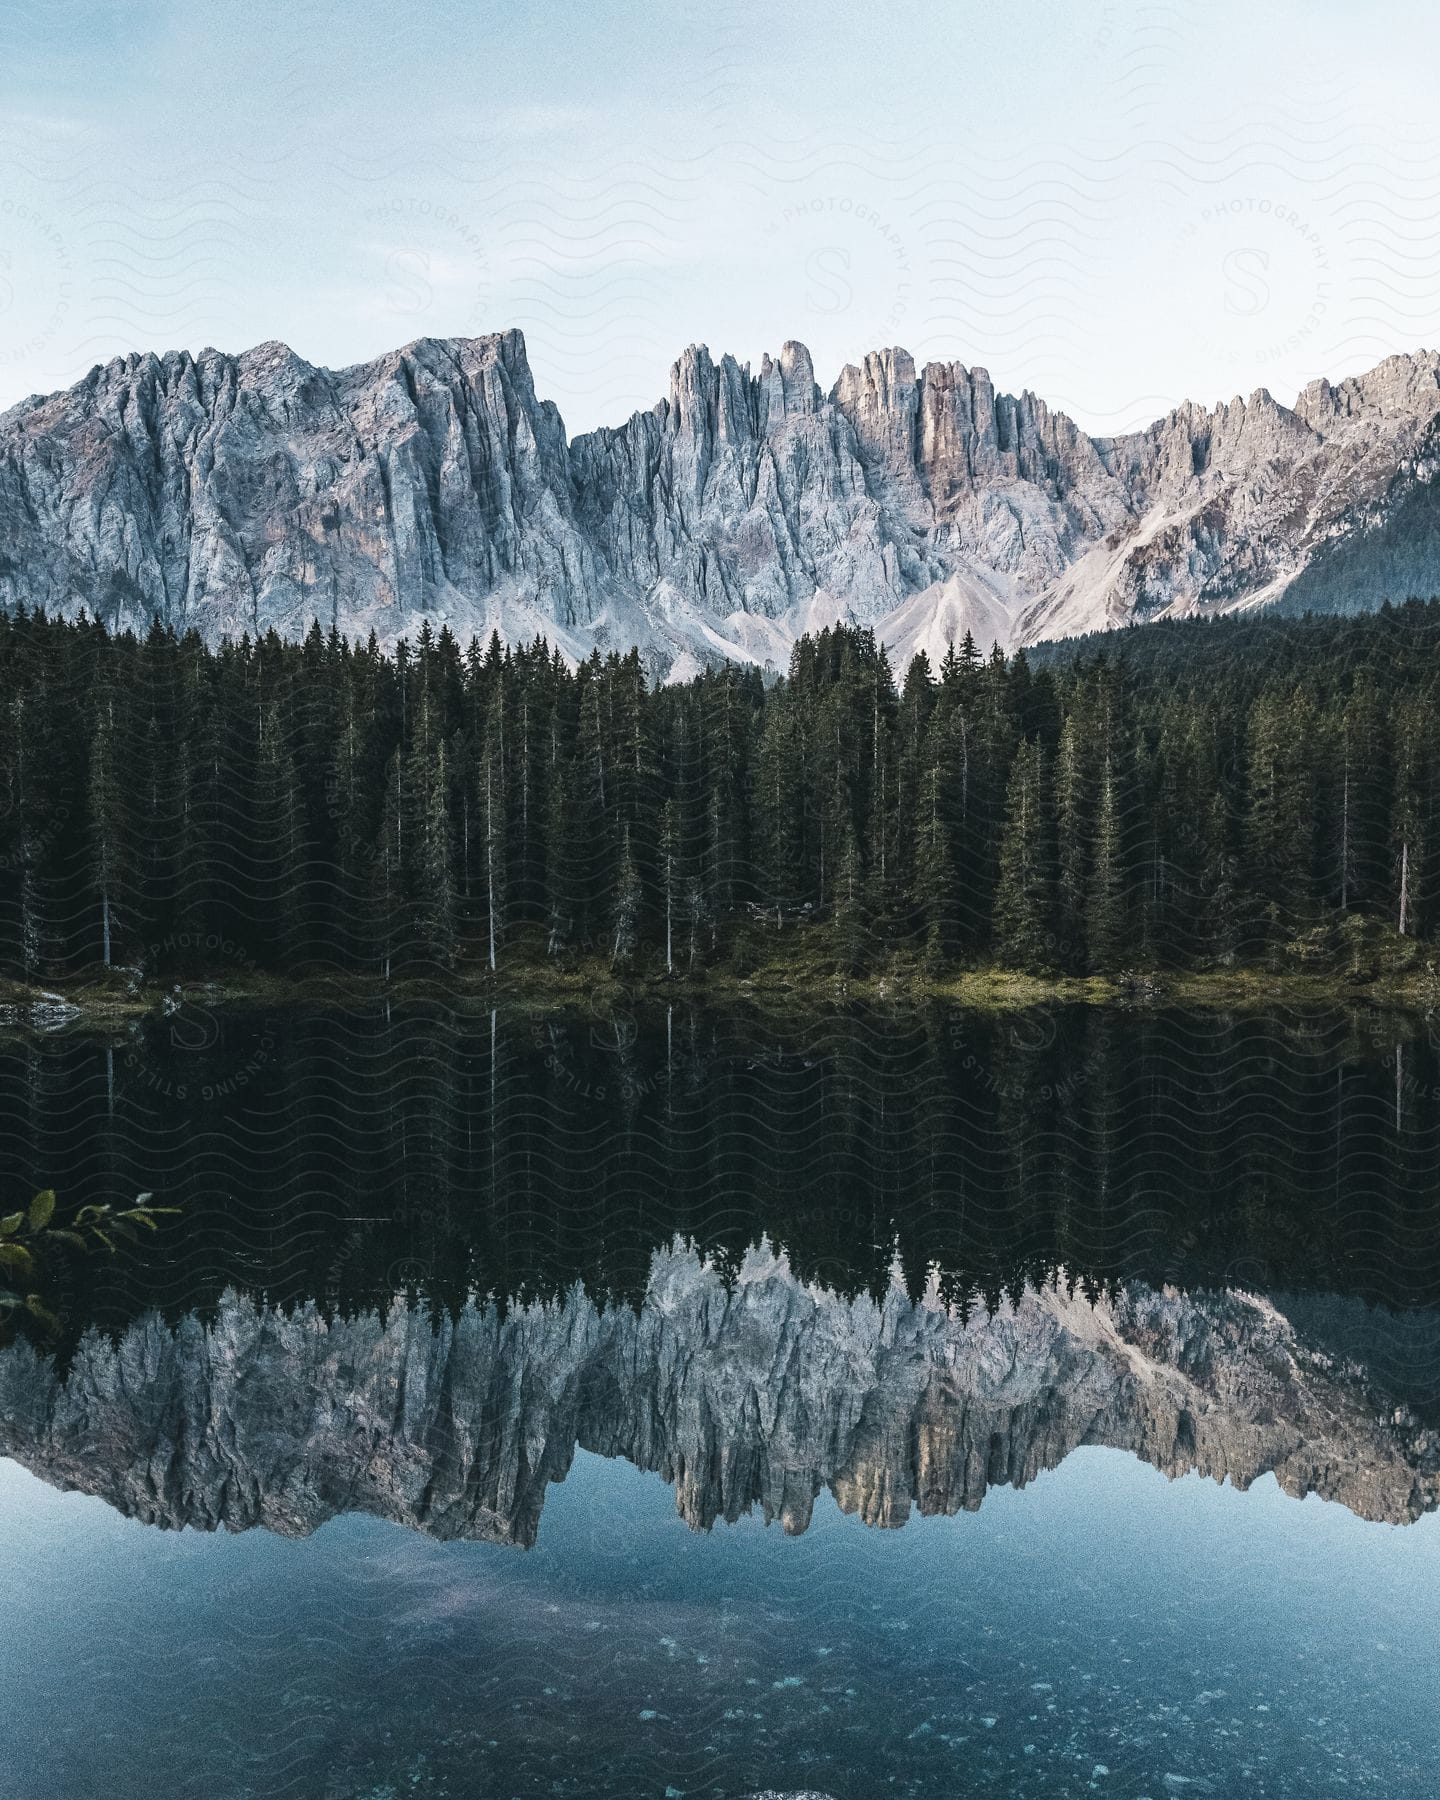 A lake reflects the forest and mountains